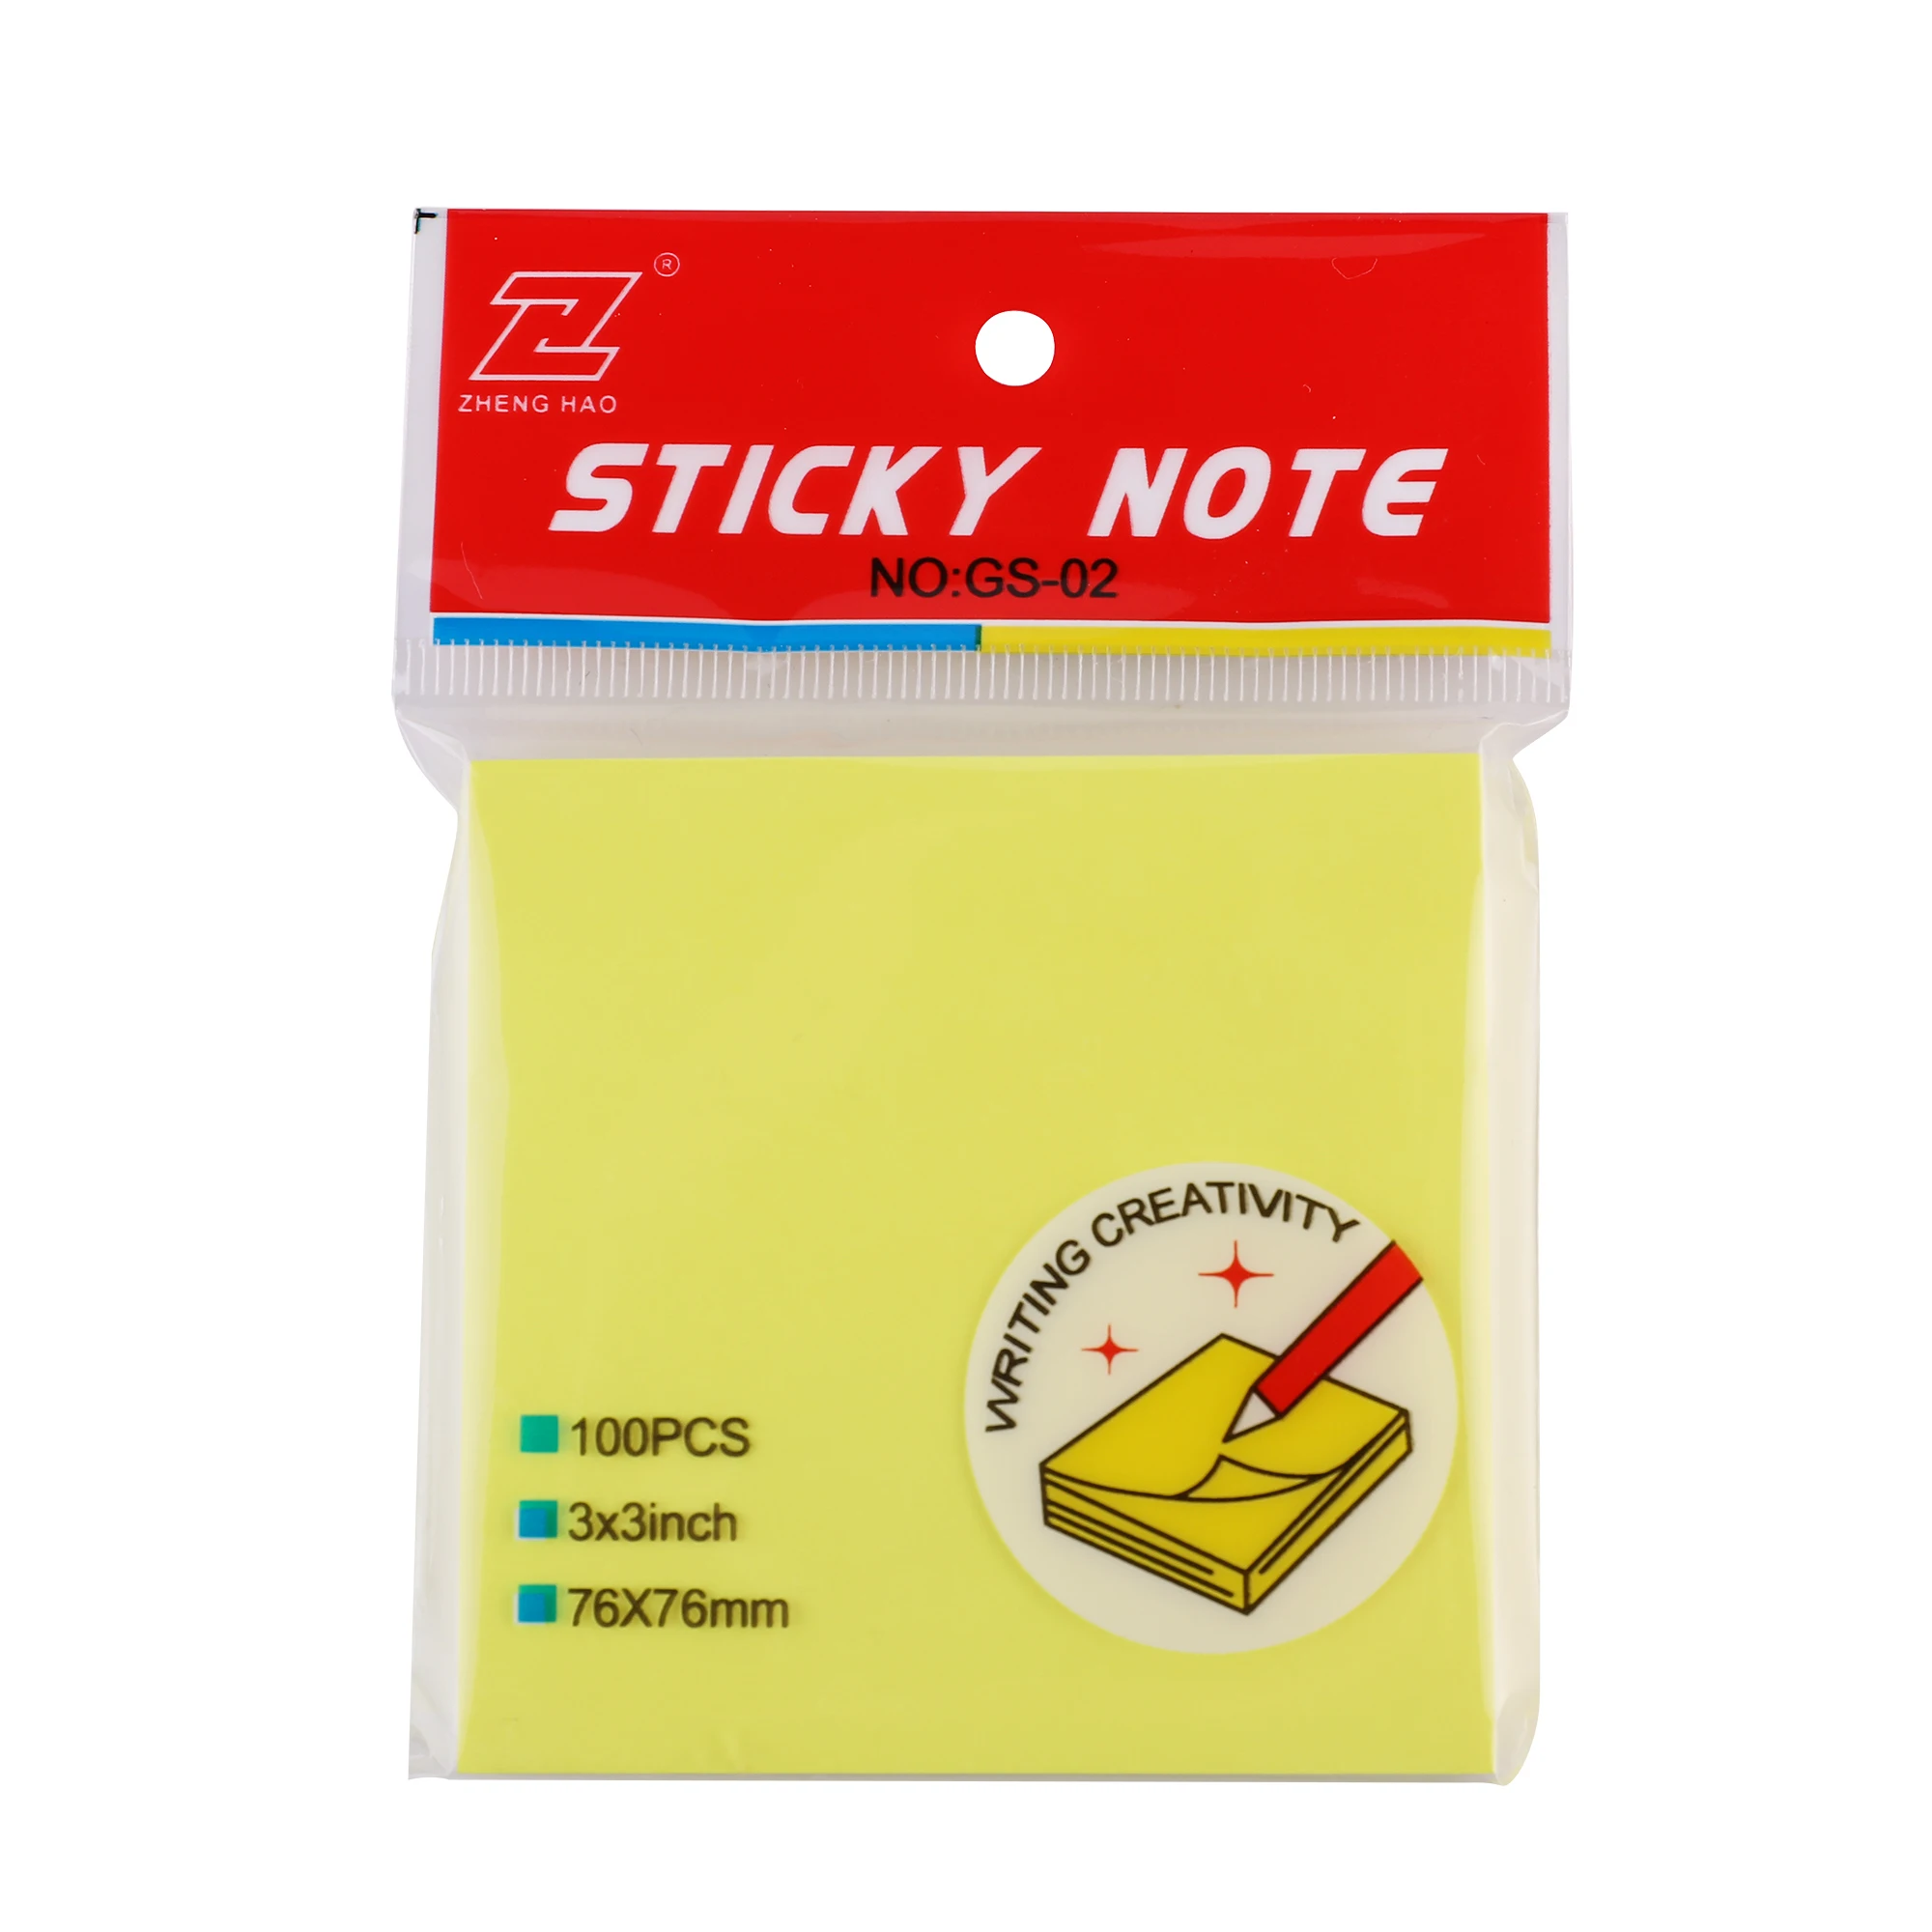 3" x 3" Memo Pad with 50 Sticky Post It Notes 76x76mm 